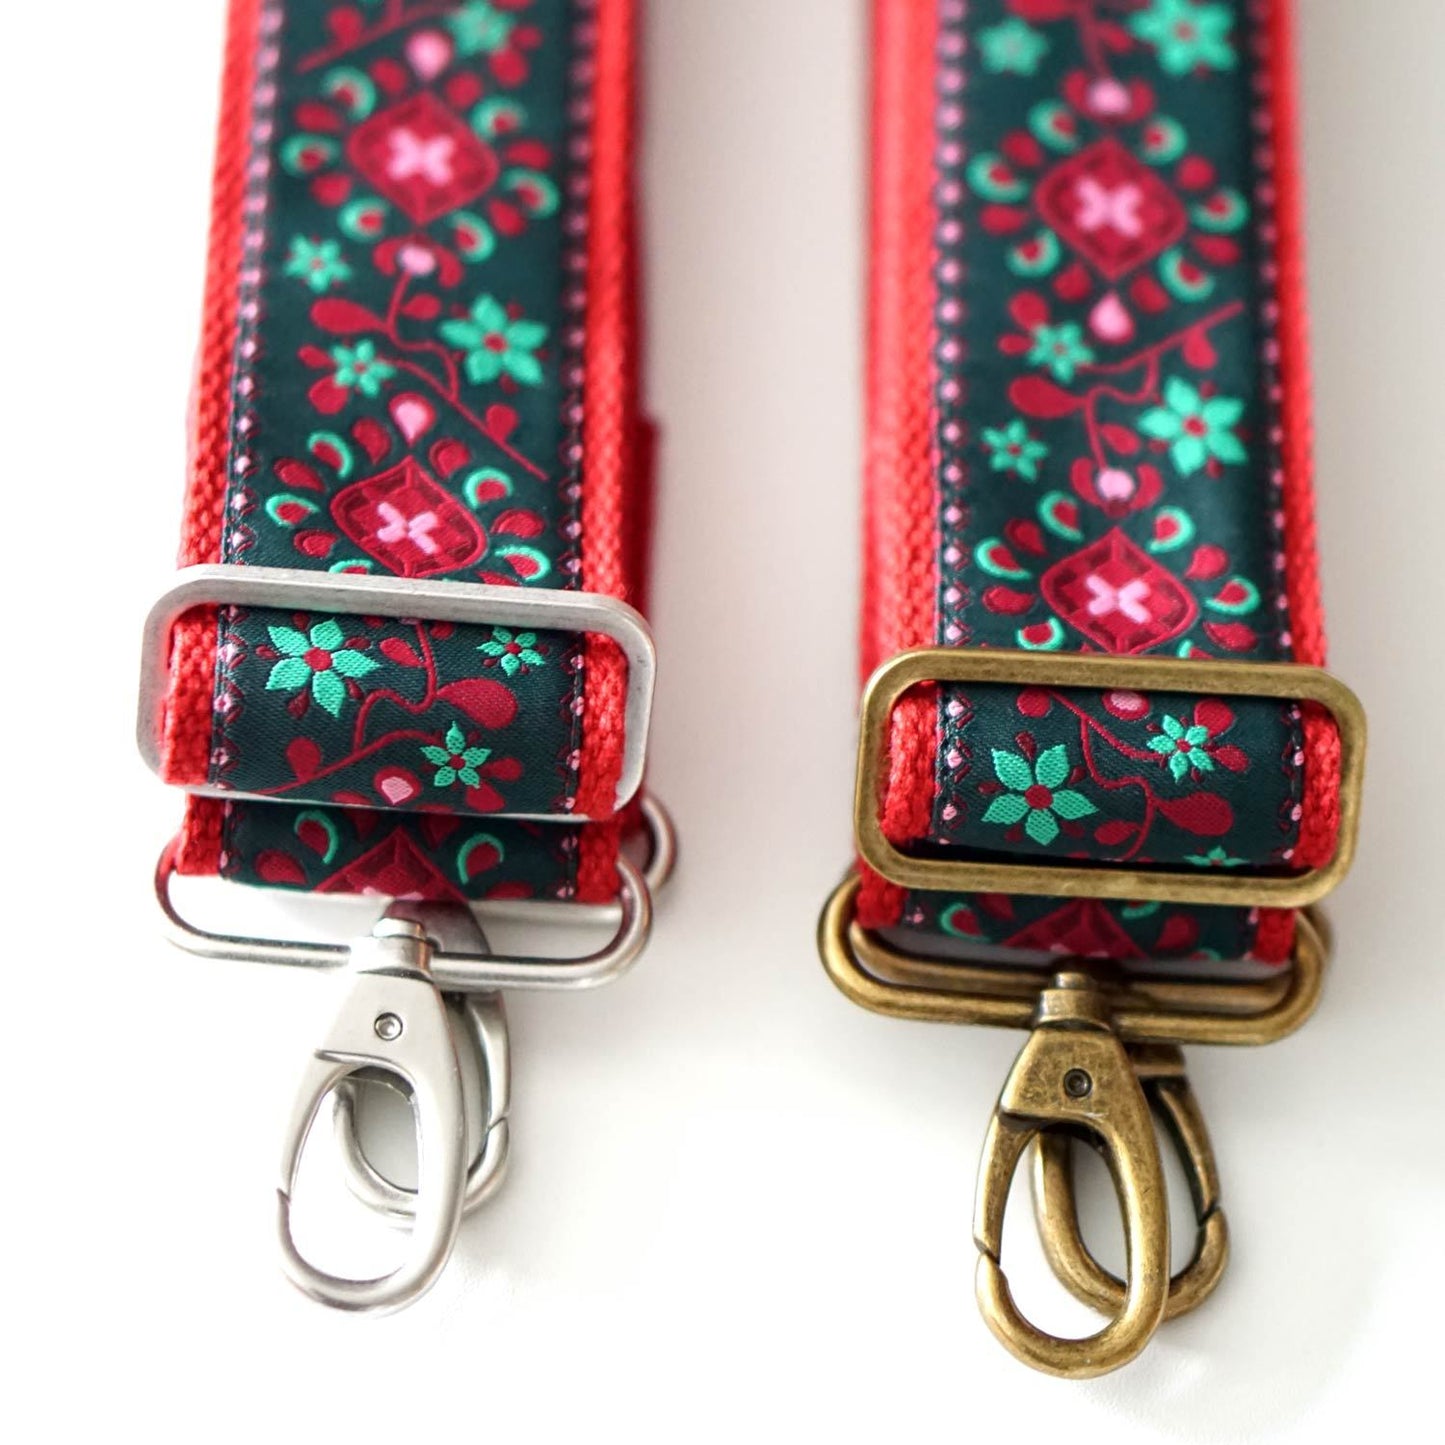 Colorful bag strap with carabiner "Resi